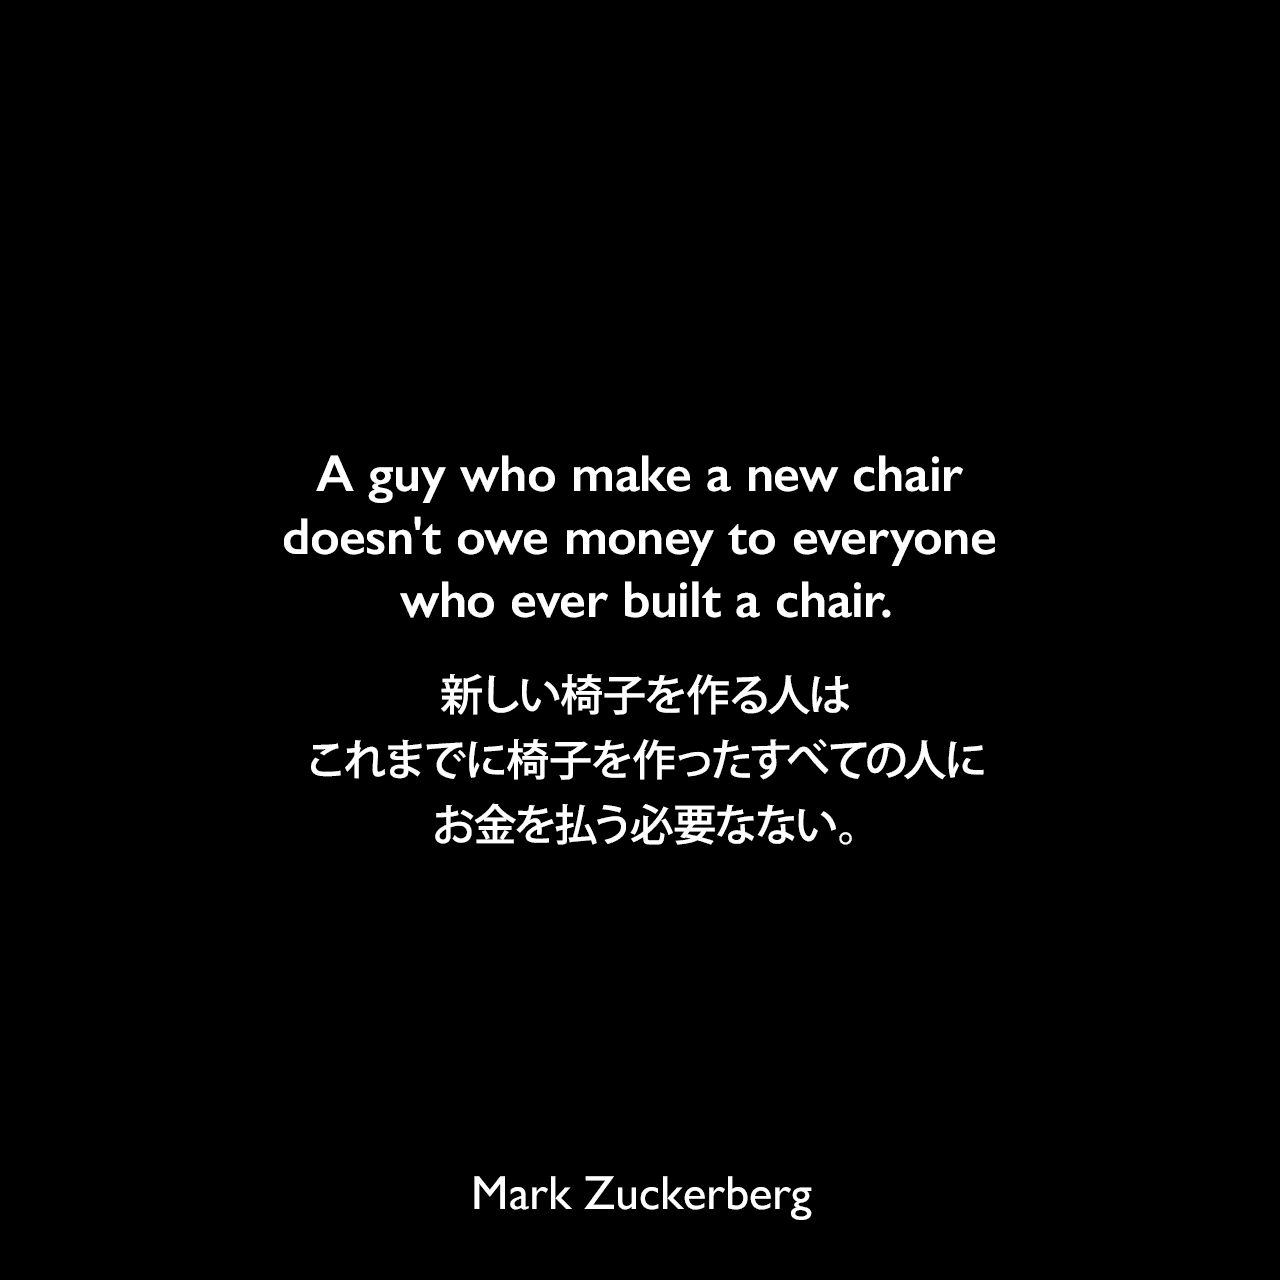 A guy who make a new chair doesn't owe money to everyone who ever built a chair.新しい椅子を作る人は、これまでに椅子を作ったすべての人にお金を払う必要なない。Mark Zuckerberg